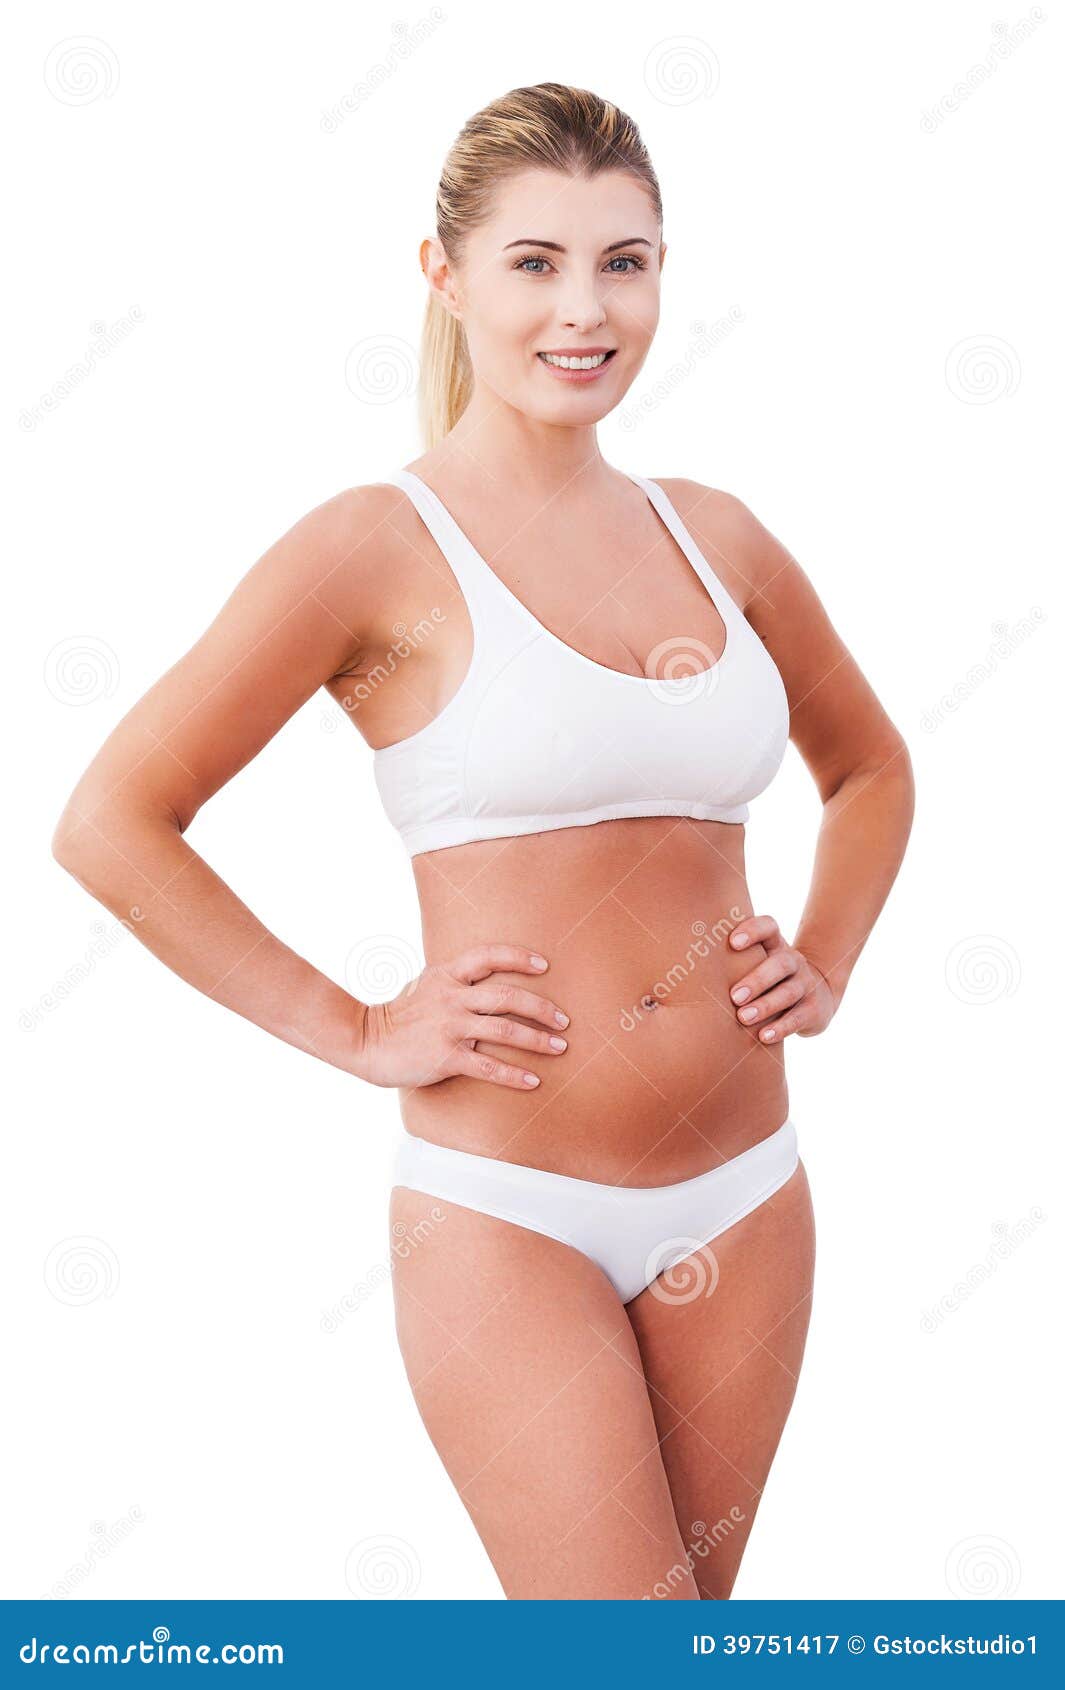 https://thumbs.dreamstime.com/z/feeling-young-confident-beautiful-mature-woman-underwear-holding-hands-hip-smiling-standing-isolated-white-39751417.jpg